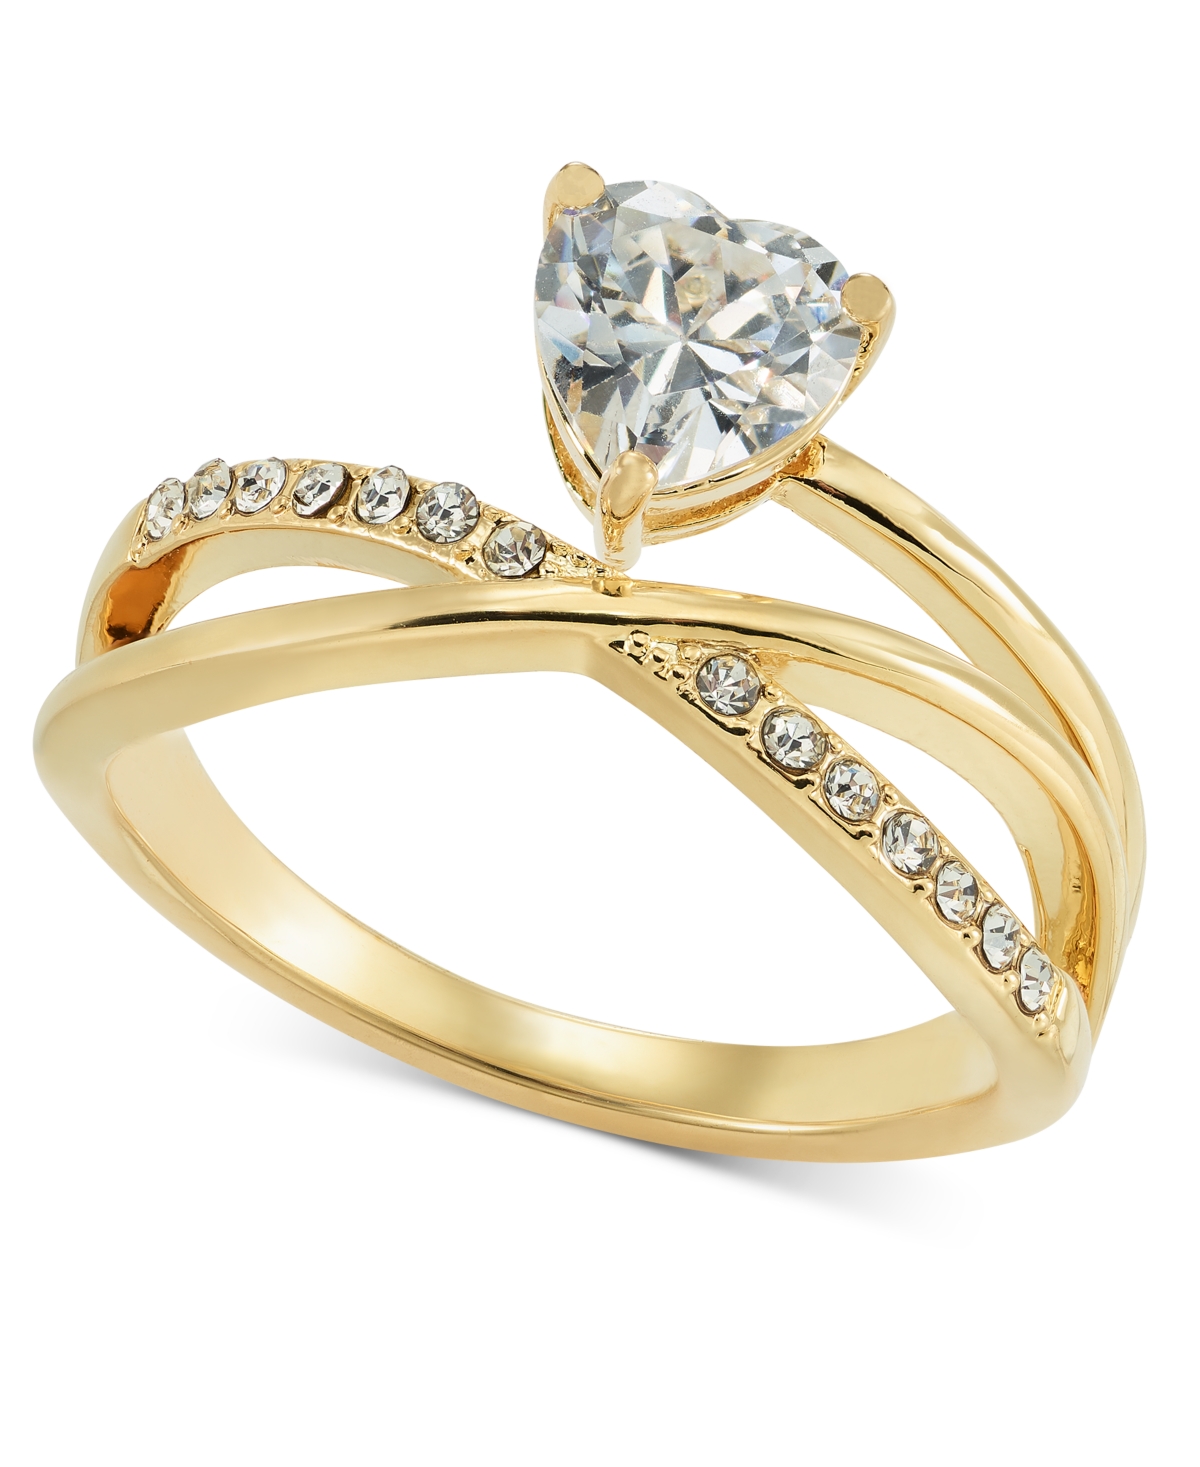 Gold-Tone Pave & Heart Cubic Zirconia Asymmetrical Ring, Created for Macy's - Gold